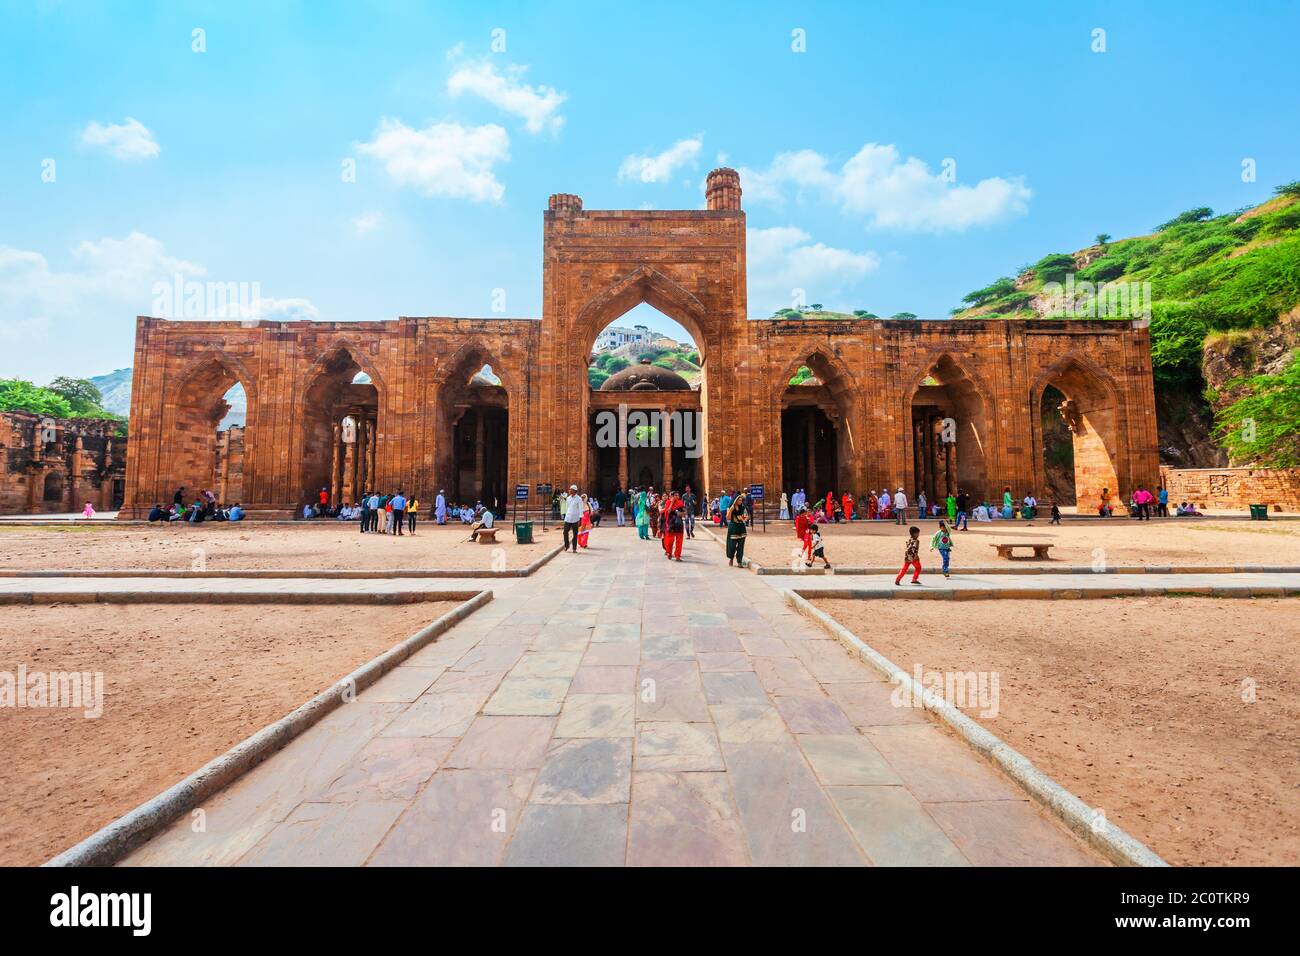 AJMER, INDIA - SEPTEMBER 25, 2019: Adhai Din Ka Jhonpra is one of the oldest mosques in India, located in Ajmer city in Rajasthan Stock Photo